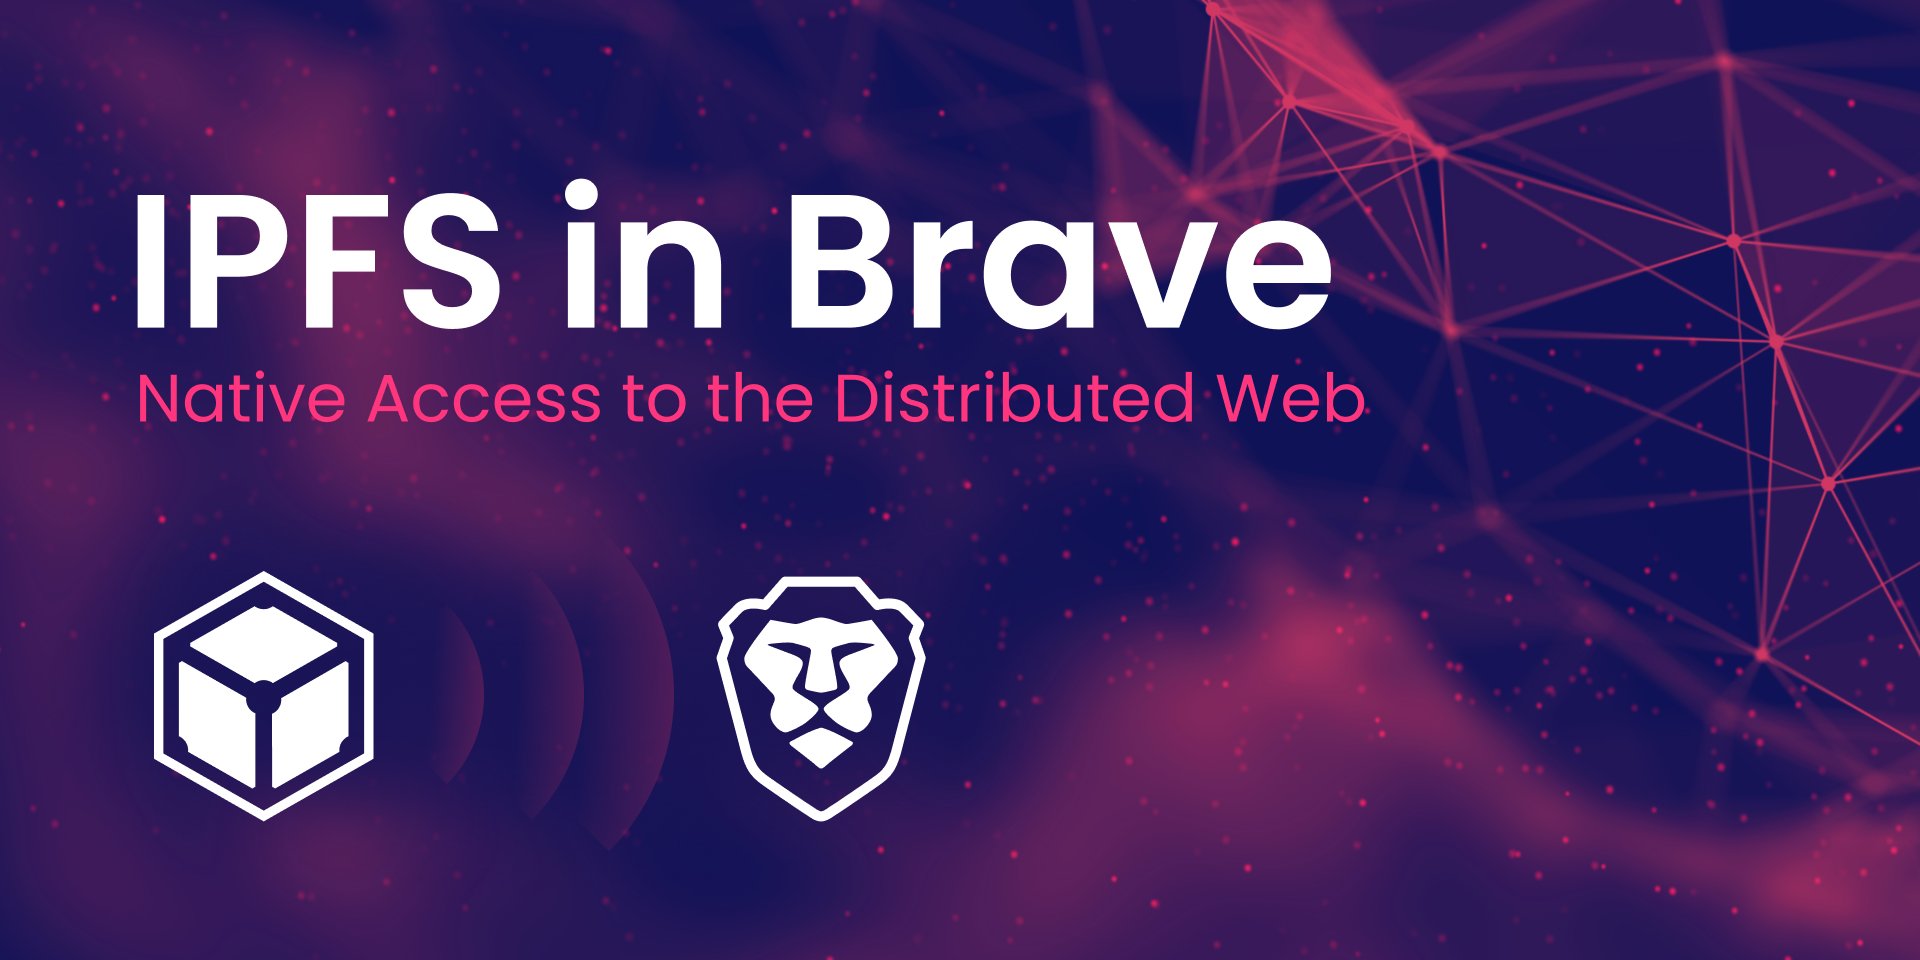 IPFS in Brave - Native Access to the Distributed Web